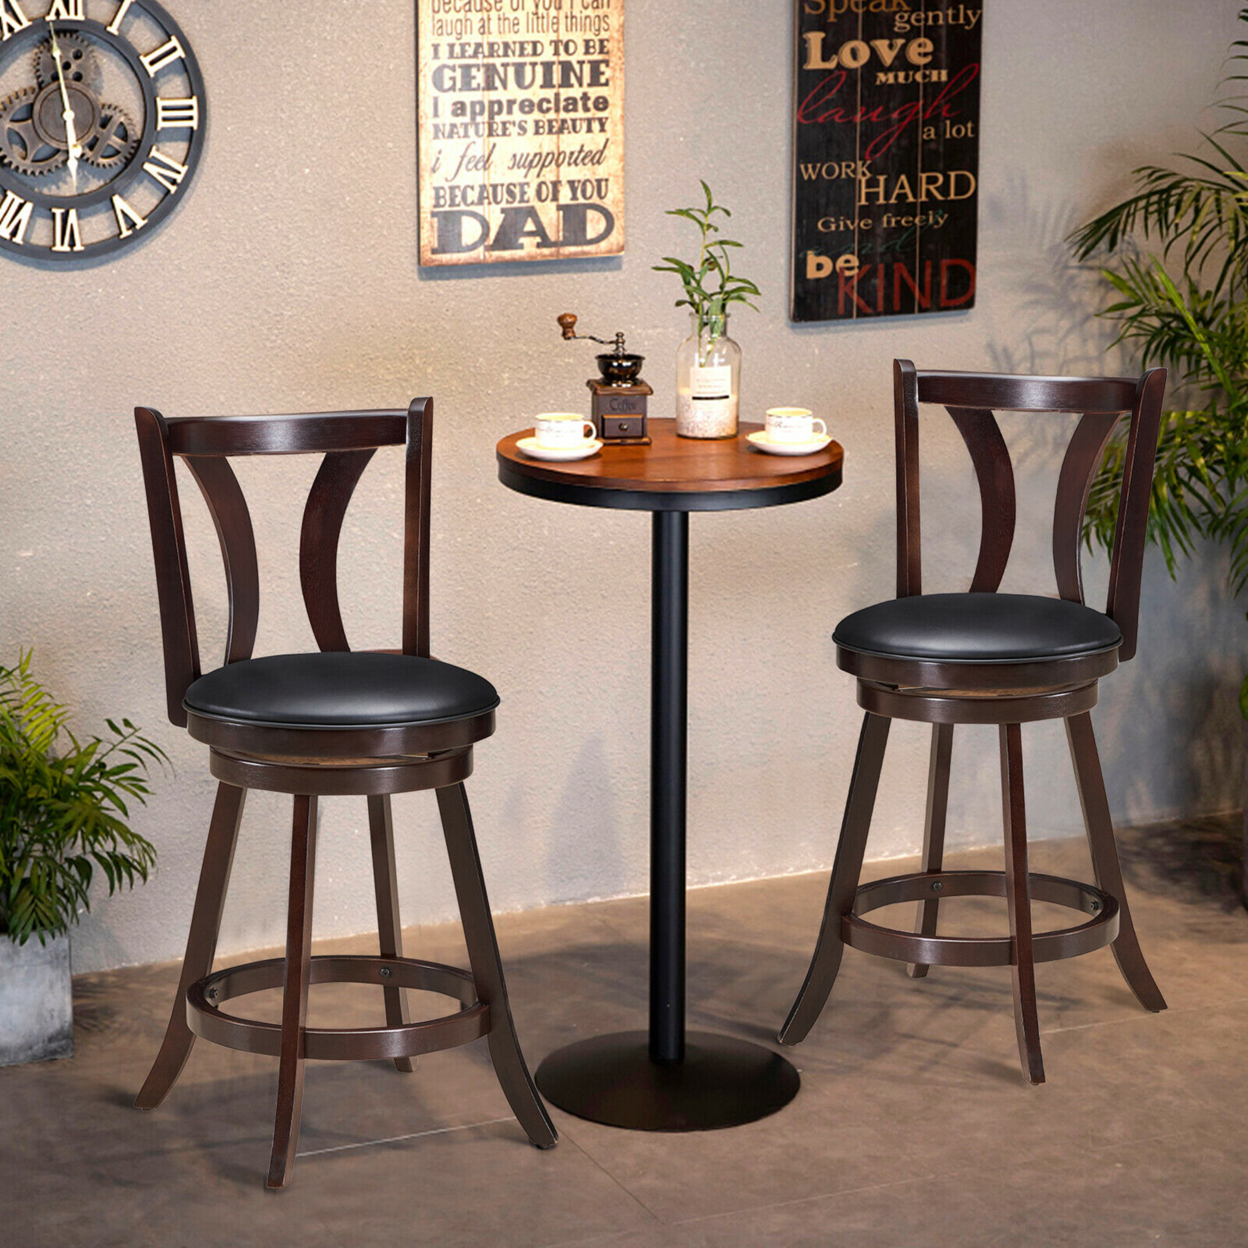 Gymax Set of 2 Swivel Bar stool 24 Counter Height Leather Padded Dining Kitchen Chair